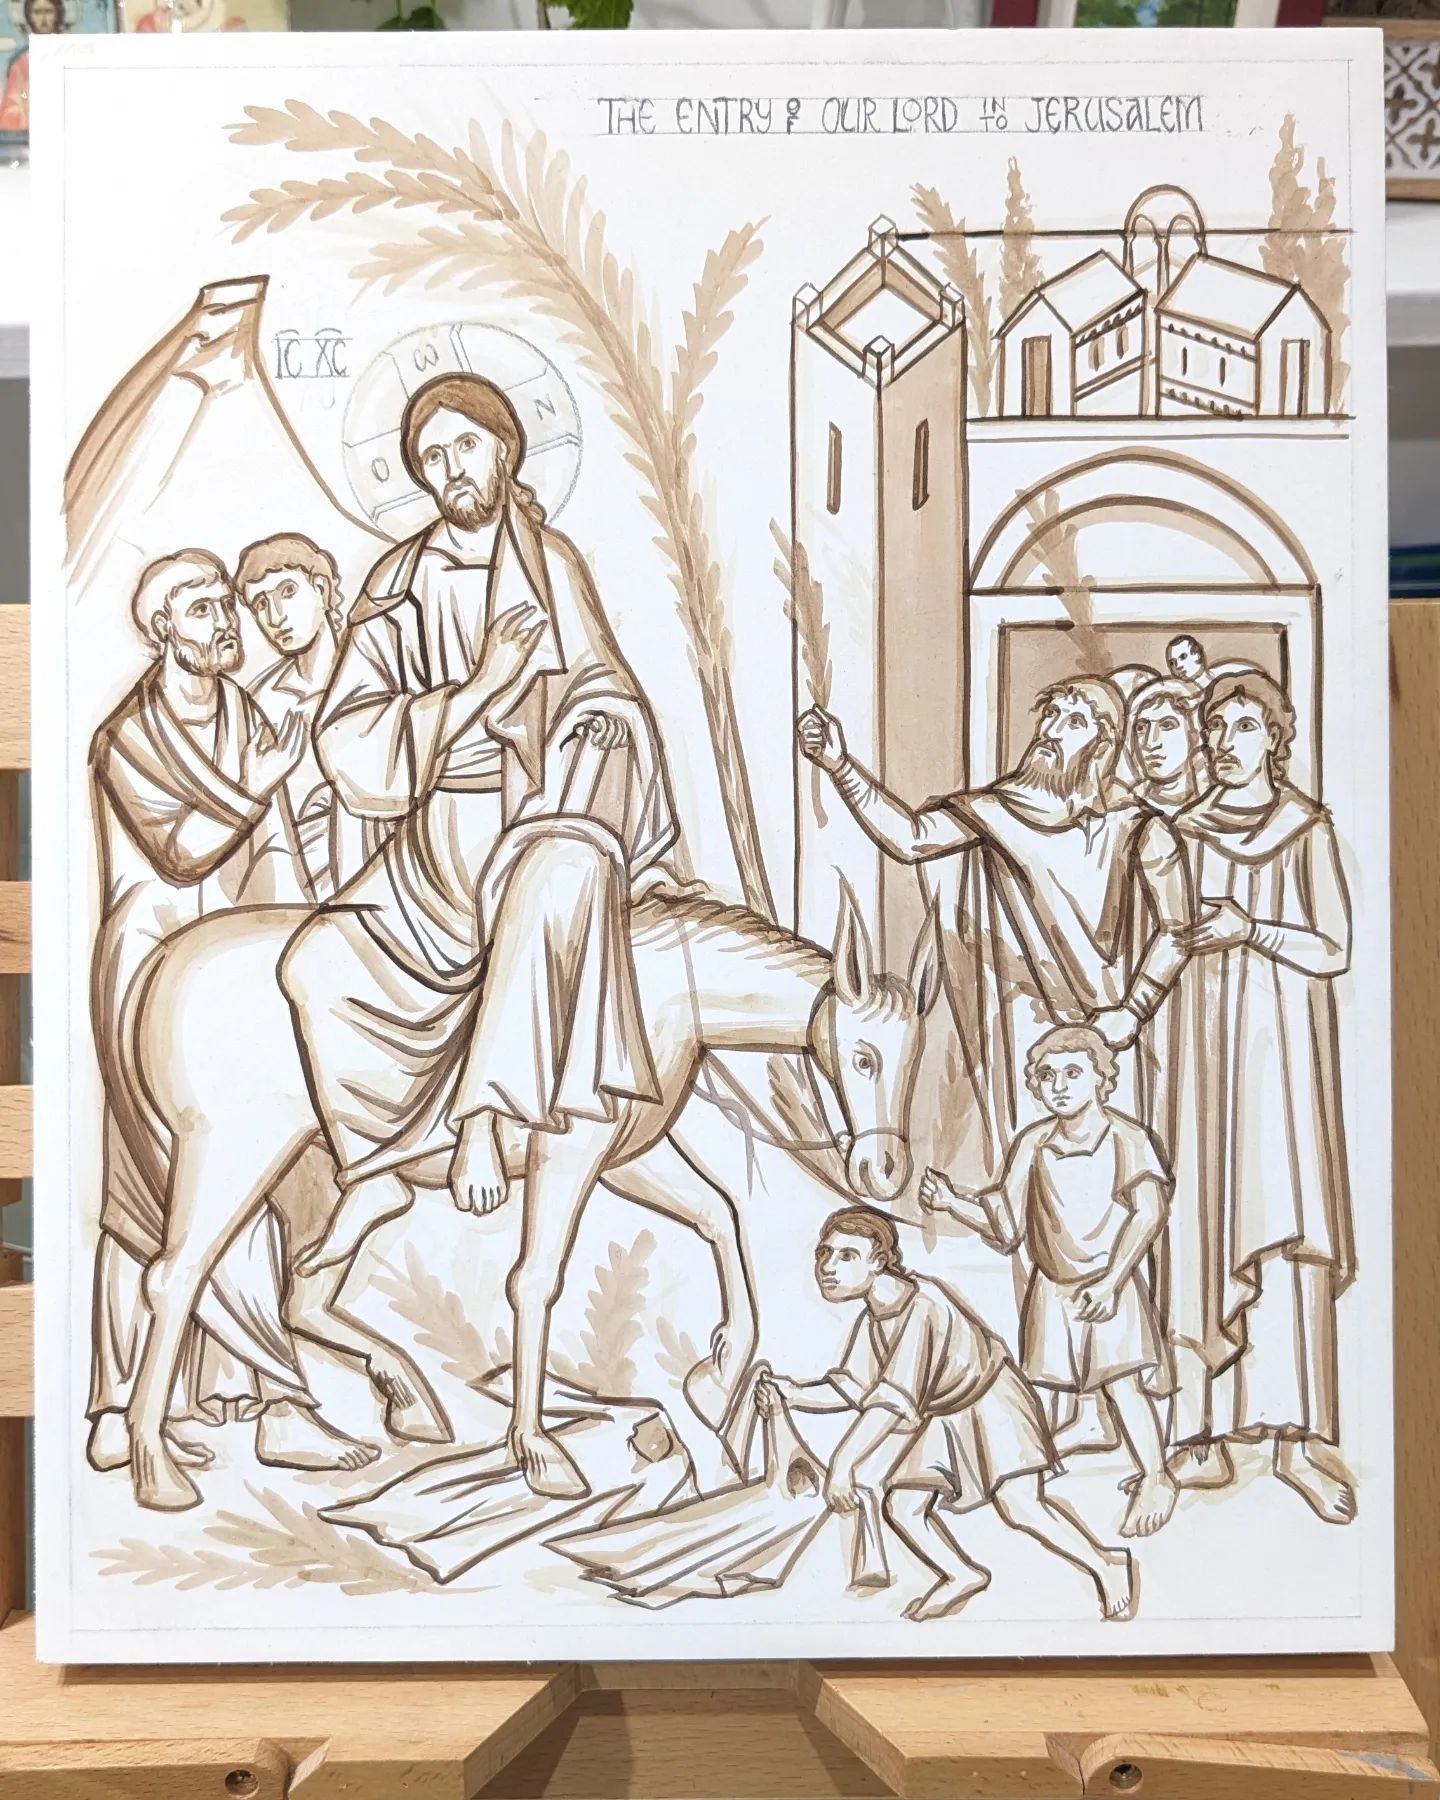 The Lord's Triumphal Entry into Jerusalem (Palm Sunday). Egg tempera on panel. Work in progress.
.
On this day in the Holy Orthodox Church, the Sunday of Palms, we celebrate the radiant and glorious festival of the Entrance of our Lord Jesus Christ i